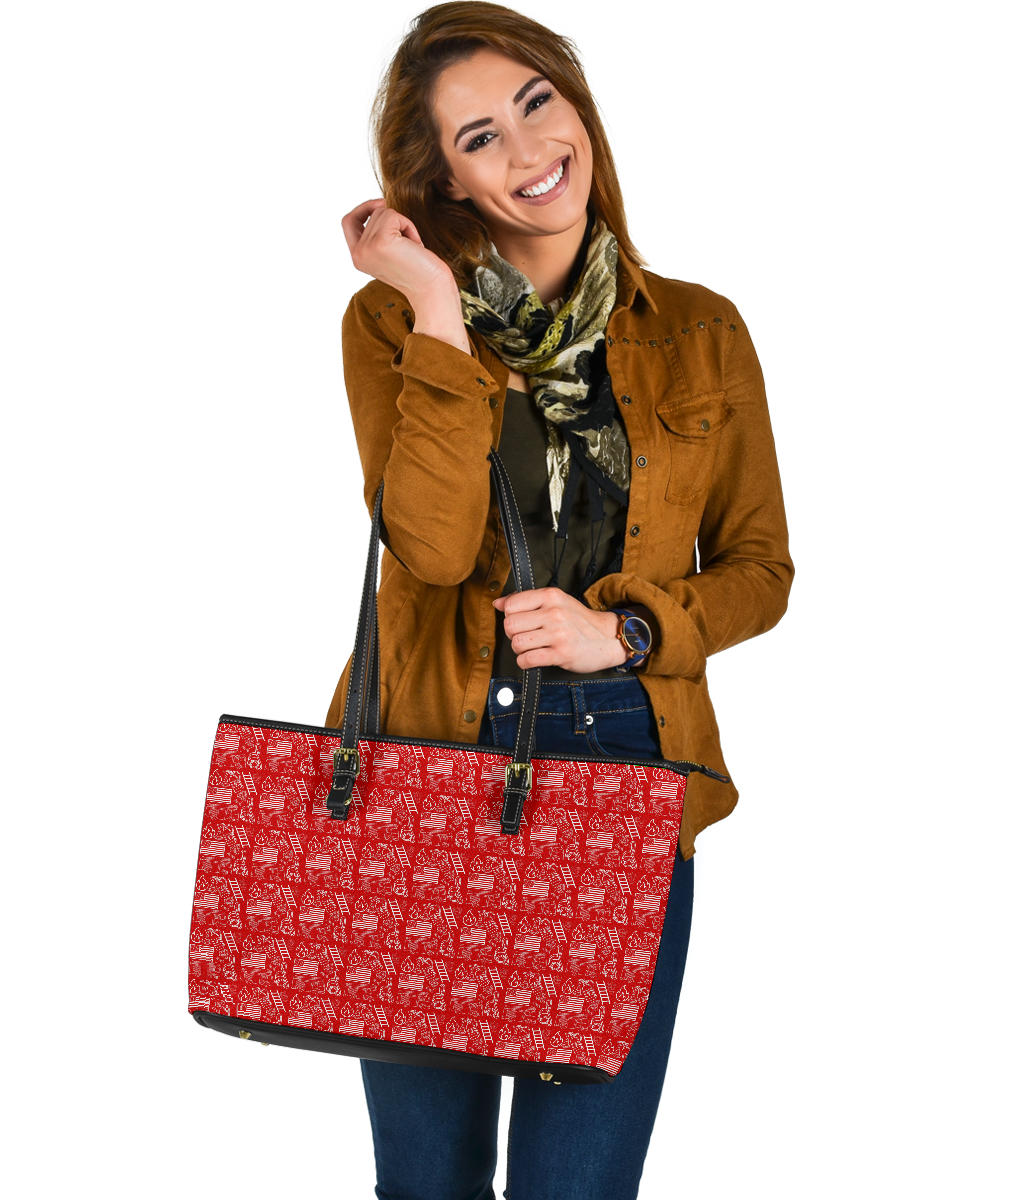 Firefighter Print Red Large PU Faux Leather Tote Bag